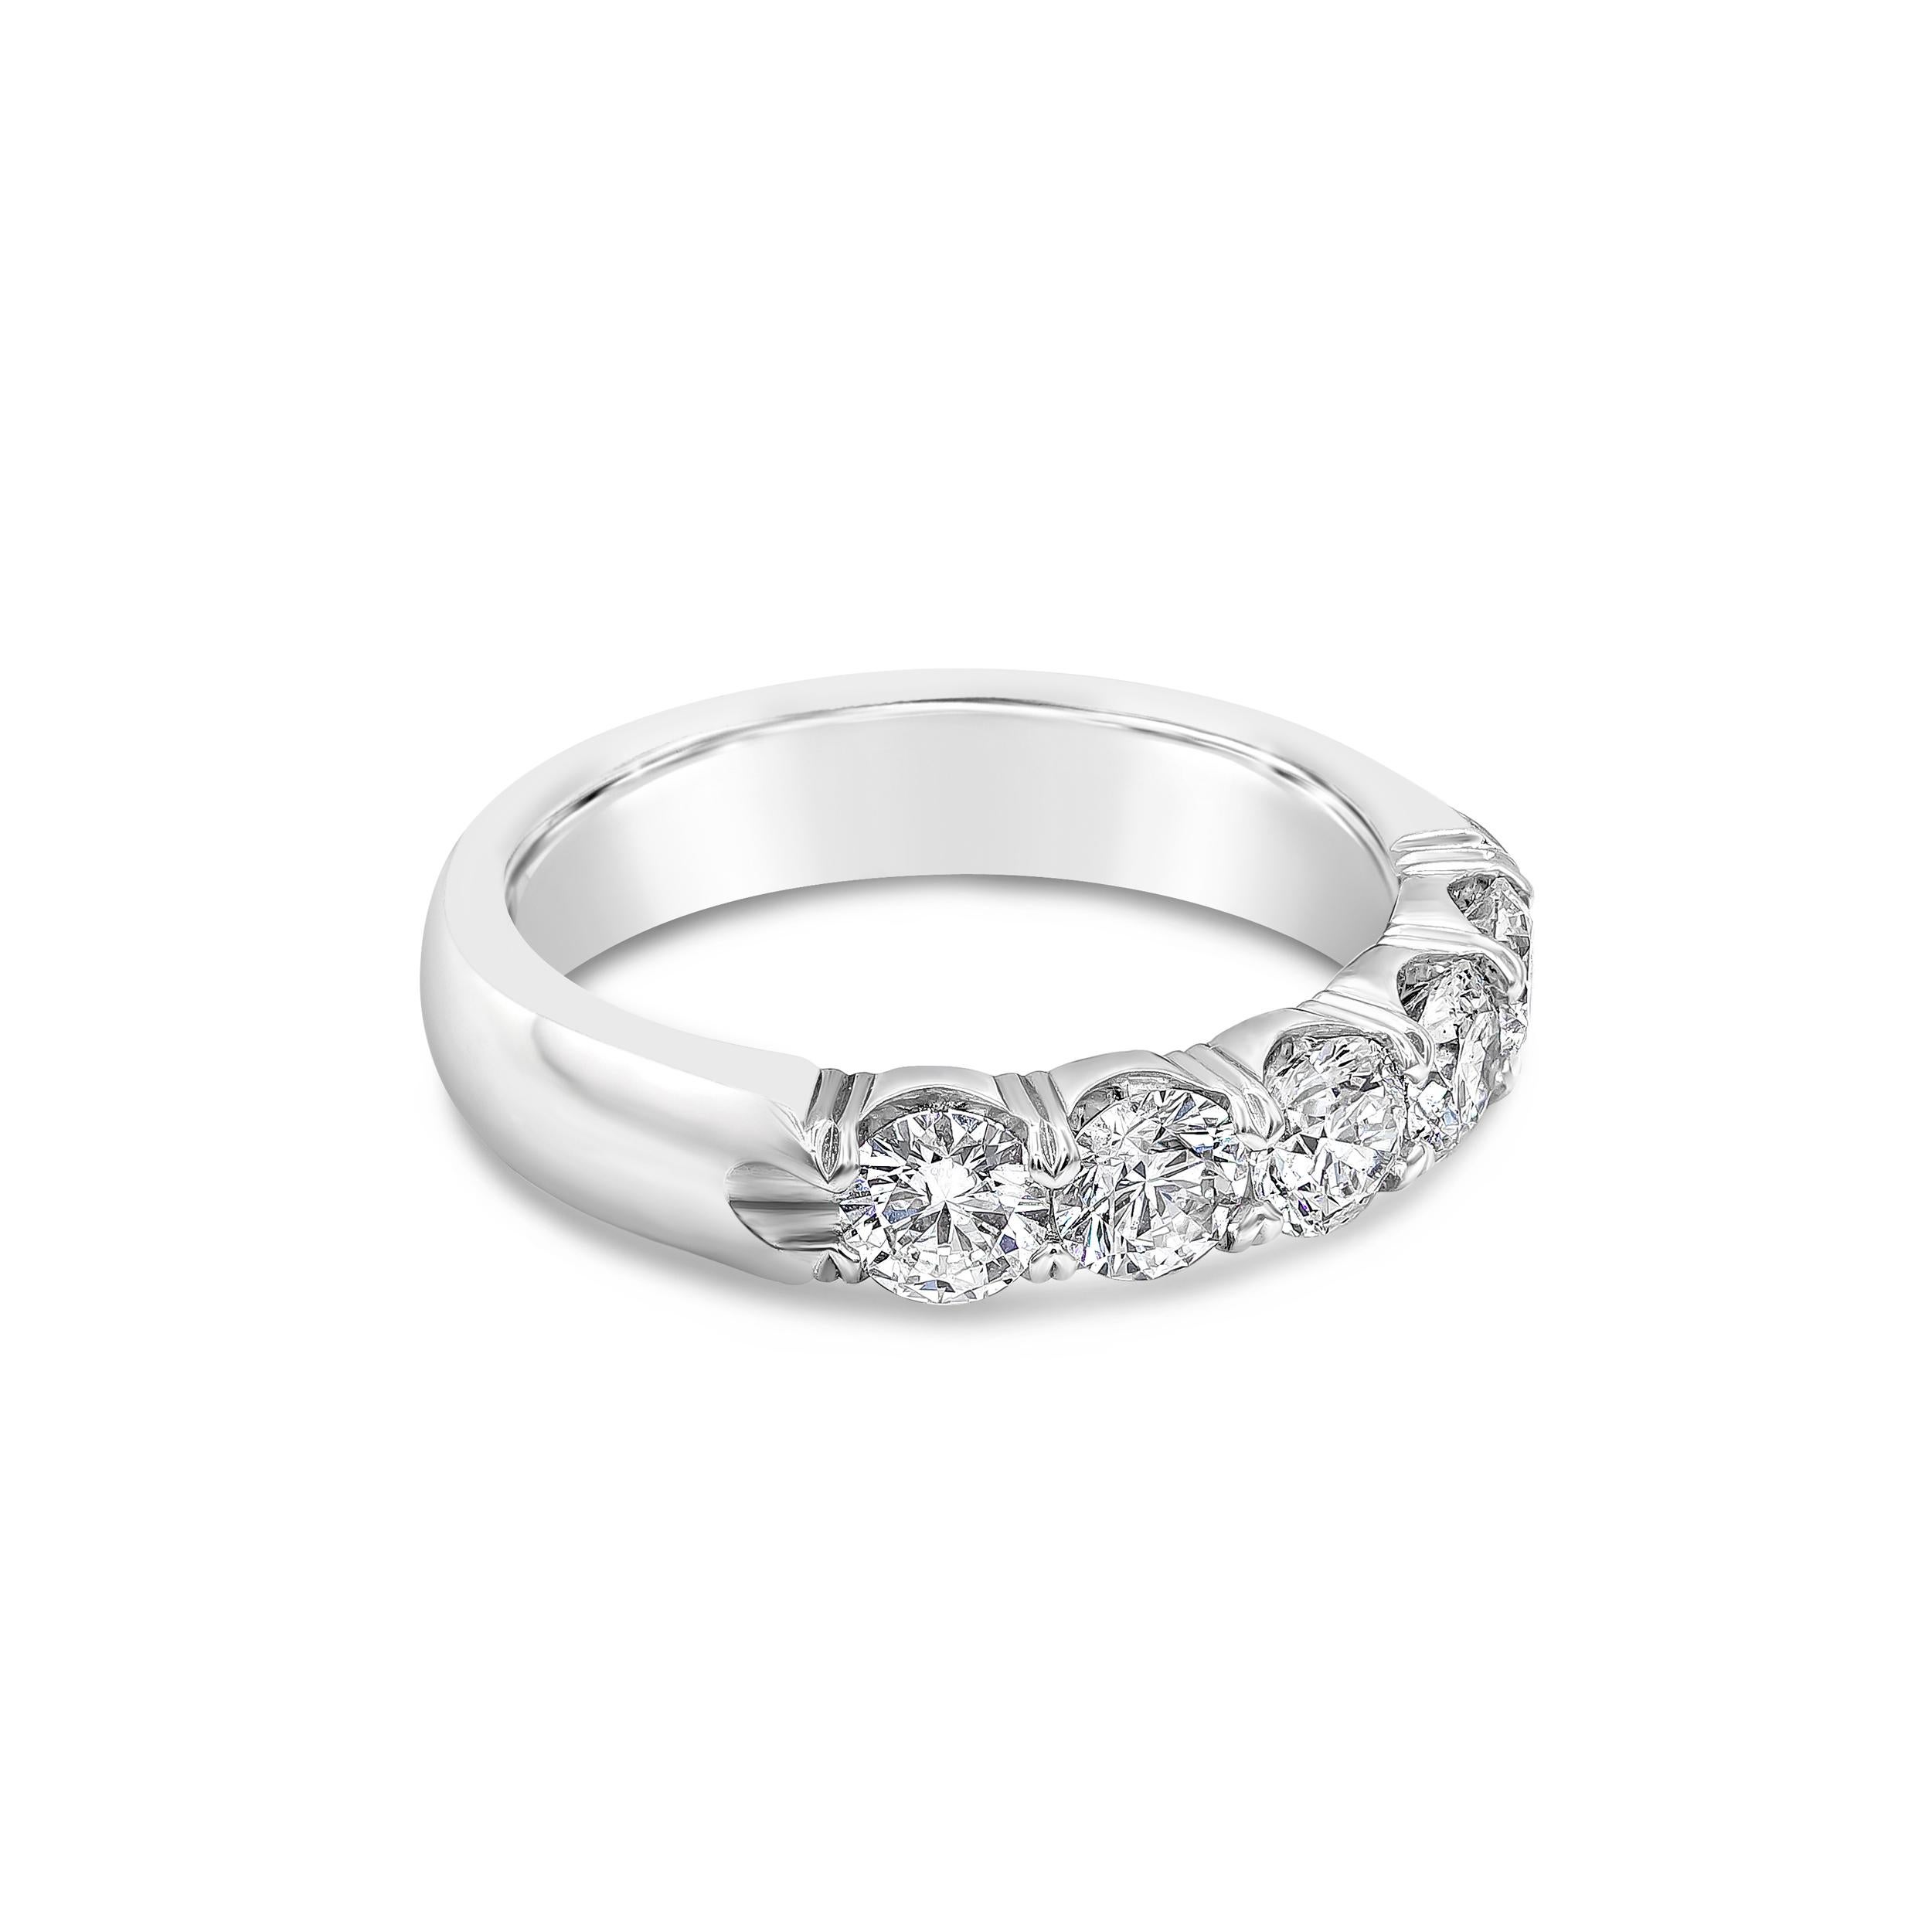 Showcasing nine round brilliant diamonds weighing 1.18 carats total, G Color and SI1 in Clarity. Elegantly set in a scalloped pave setting. Made with Platinum. Size 6.25 US

Style available in different price ranges. Prices are based on your